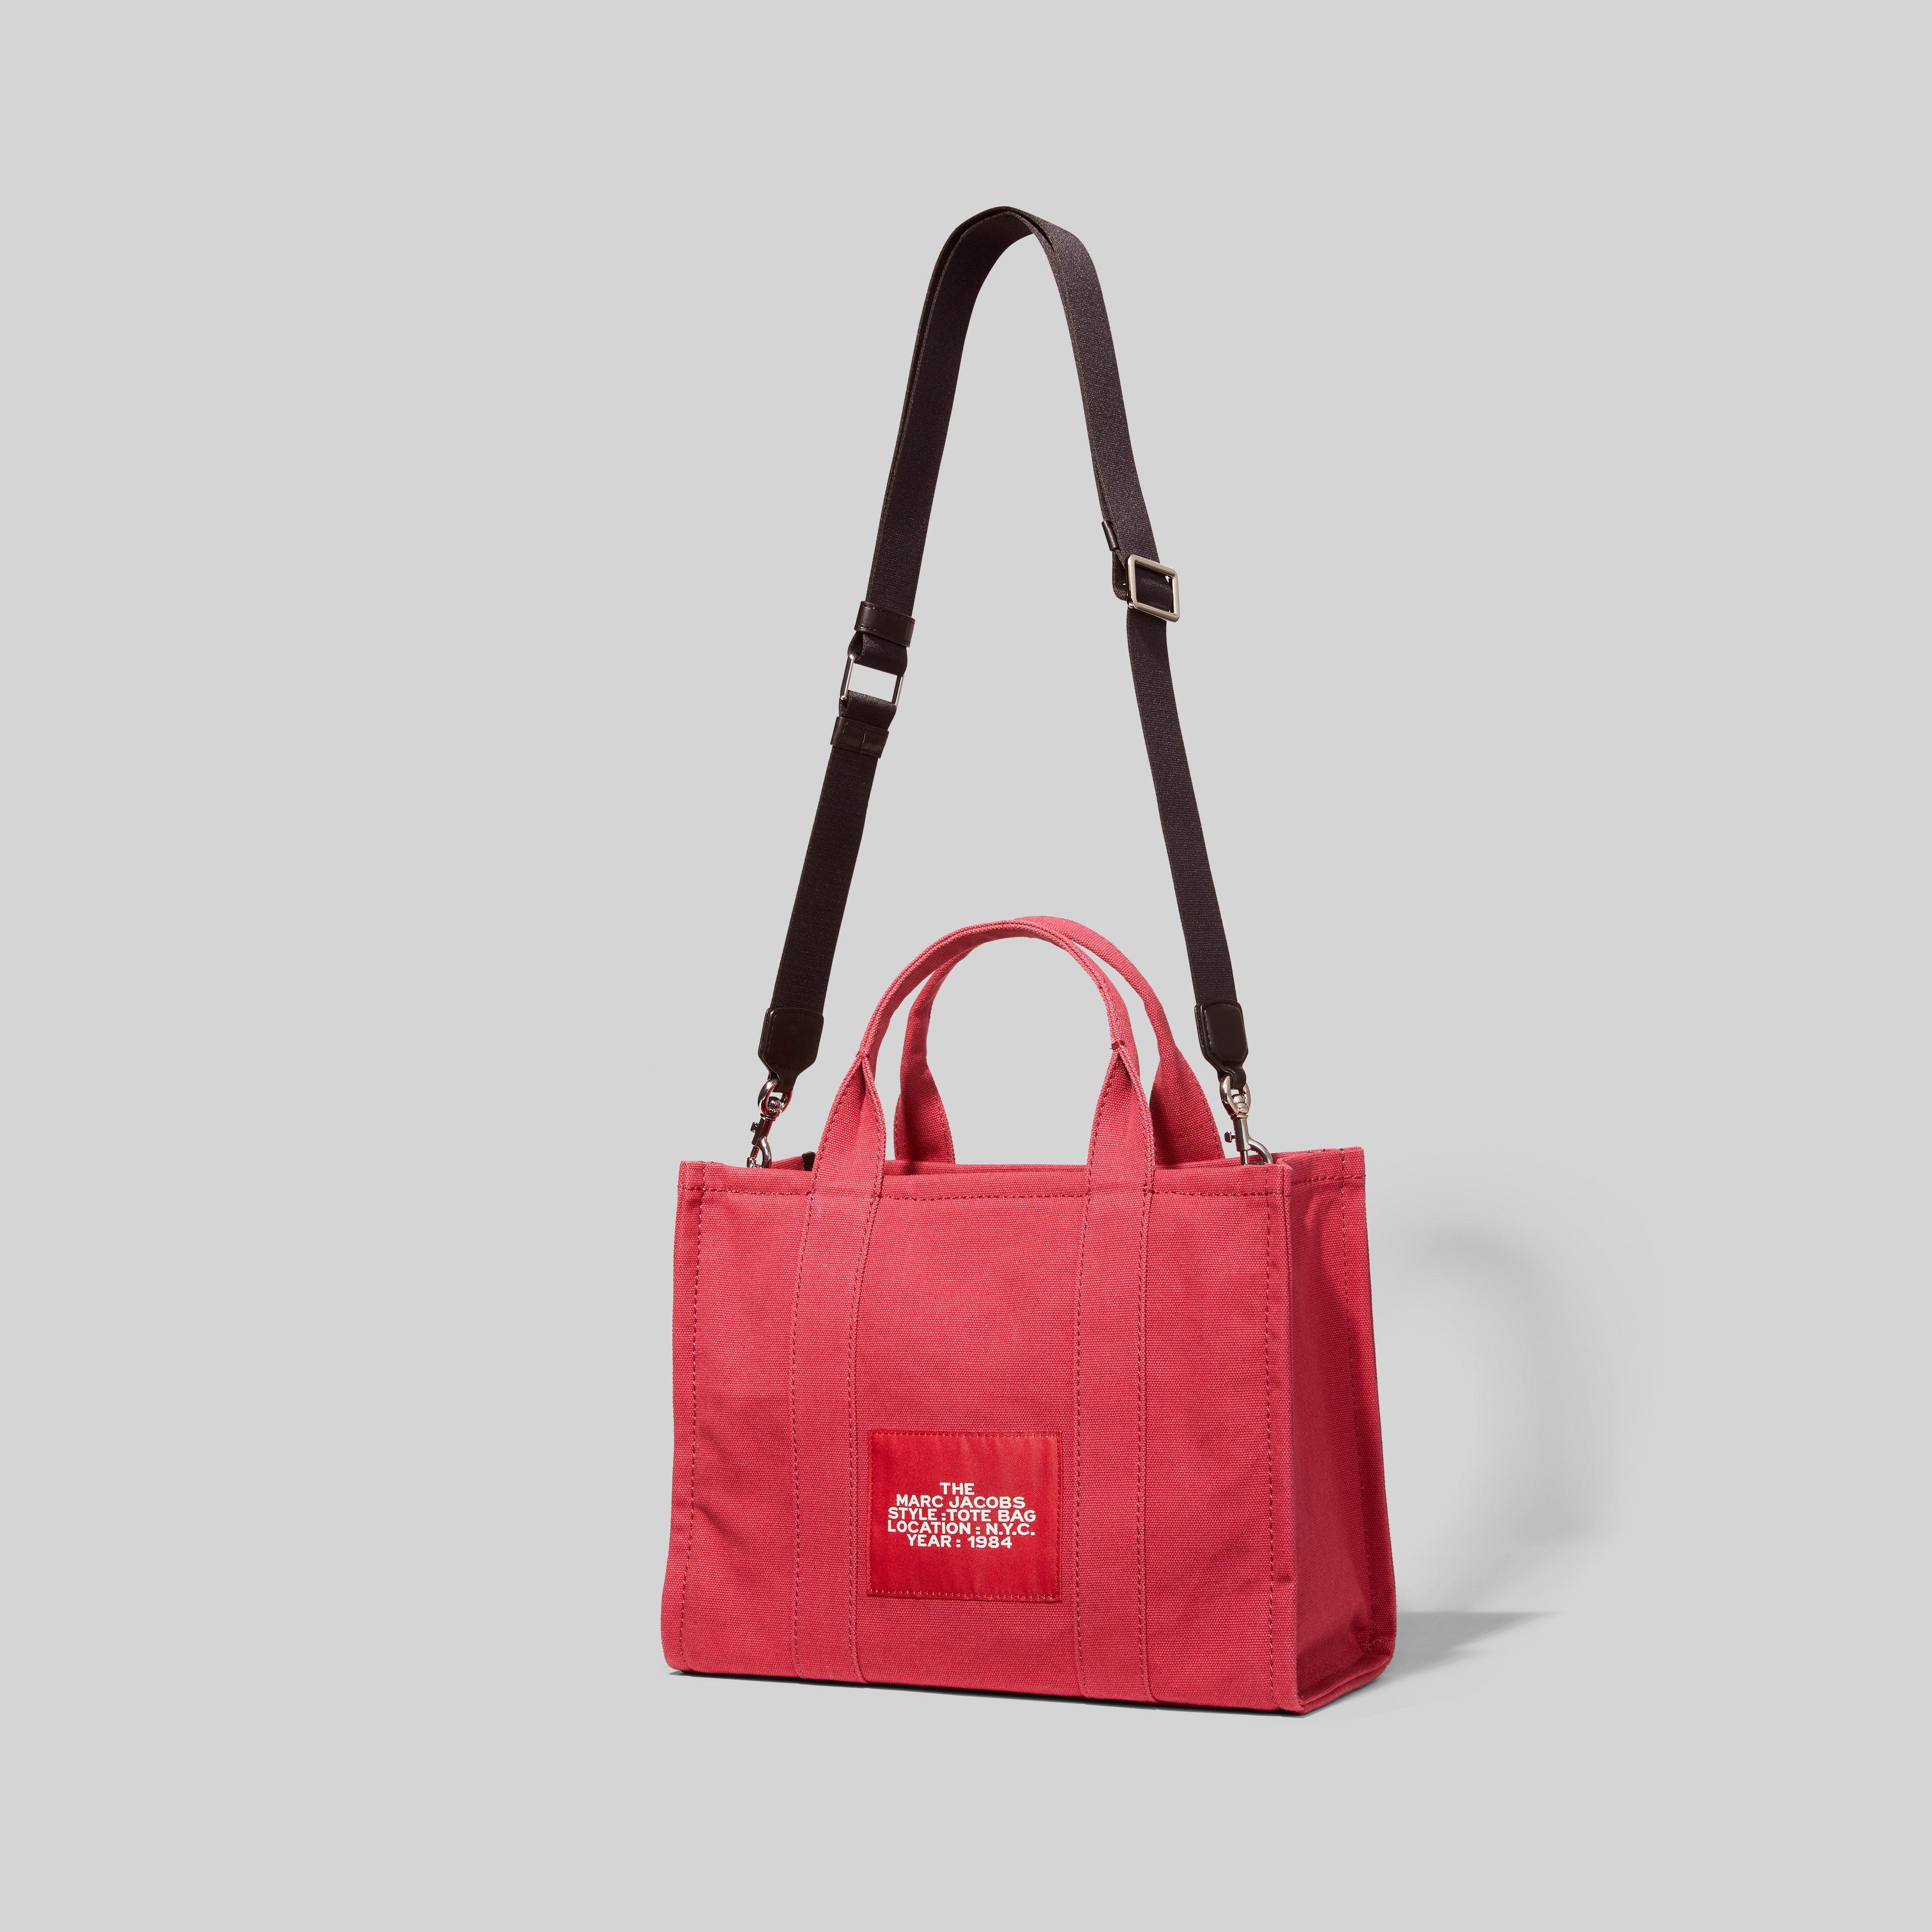 Marc Jacobs Canvas The Small Traveler Tote Bag in Red - Lyst